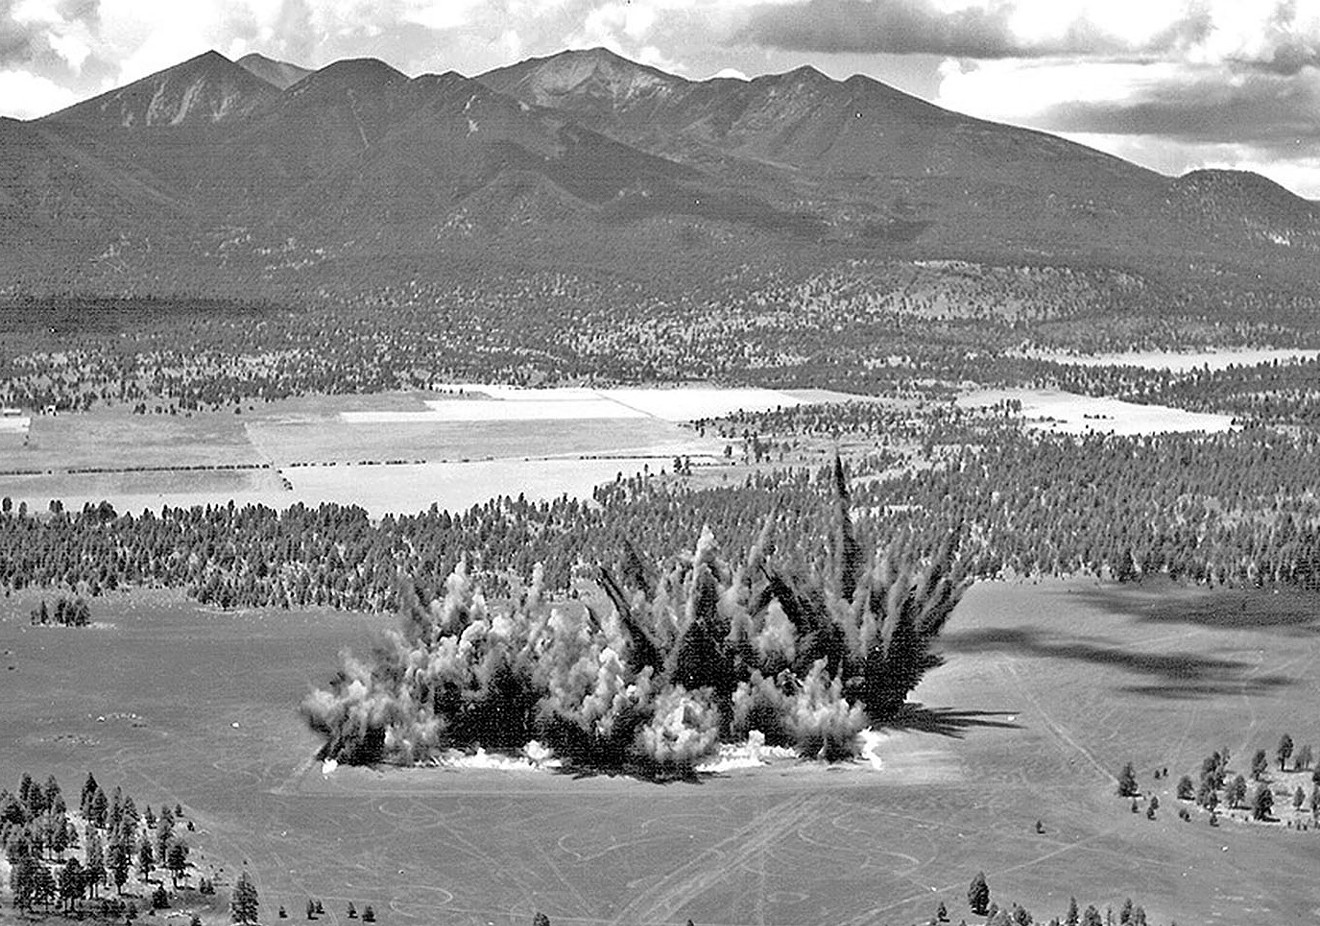 Explosions in the Cinder Lake area outside of Flagstaff in the mid-1960s by NASA and the USGS.